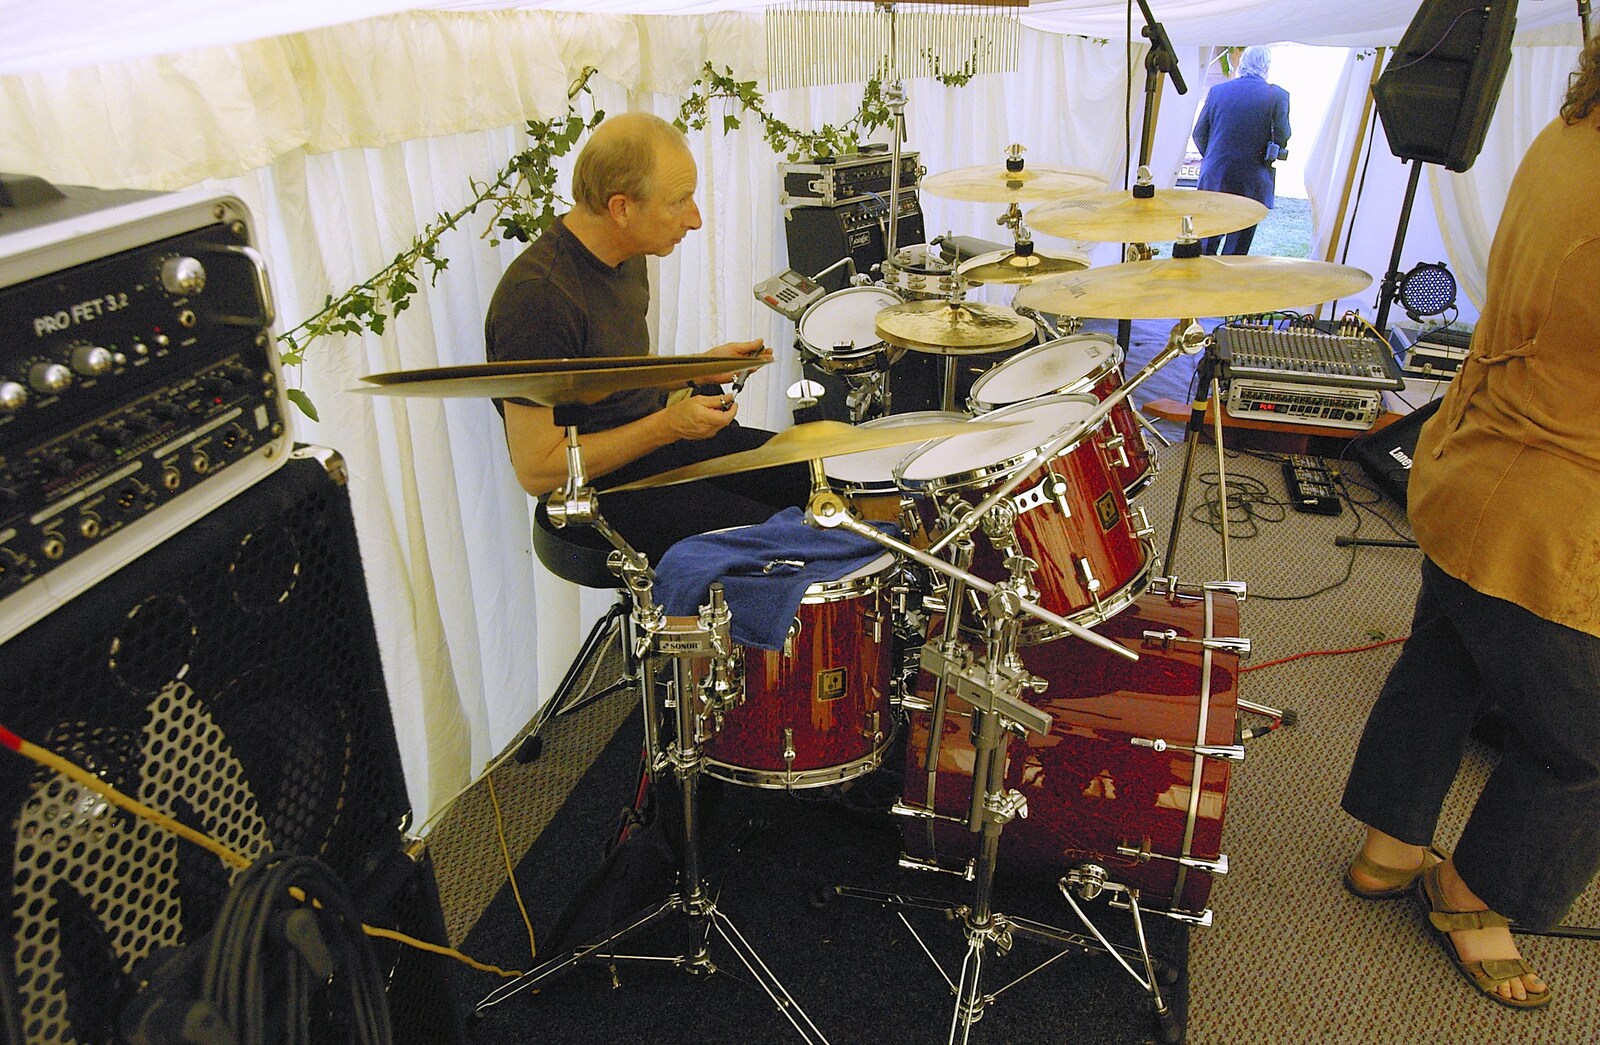 Henry waits behind his kit from The BBs Play Athelington Hall, Horham, Suffolk - 29th June 2006